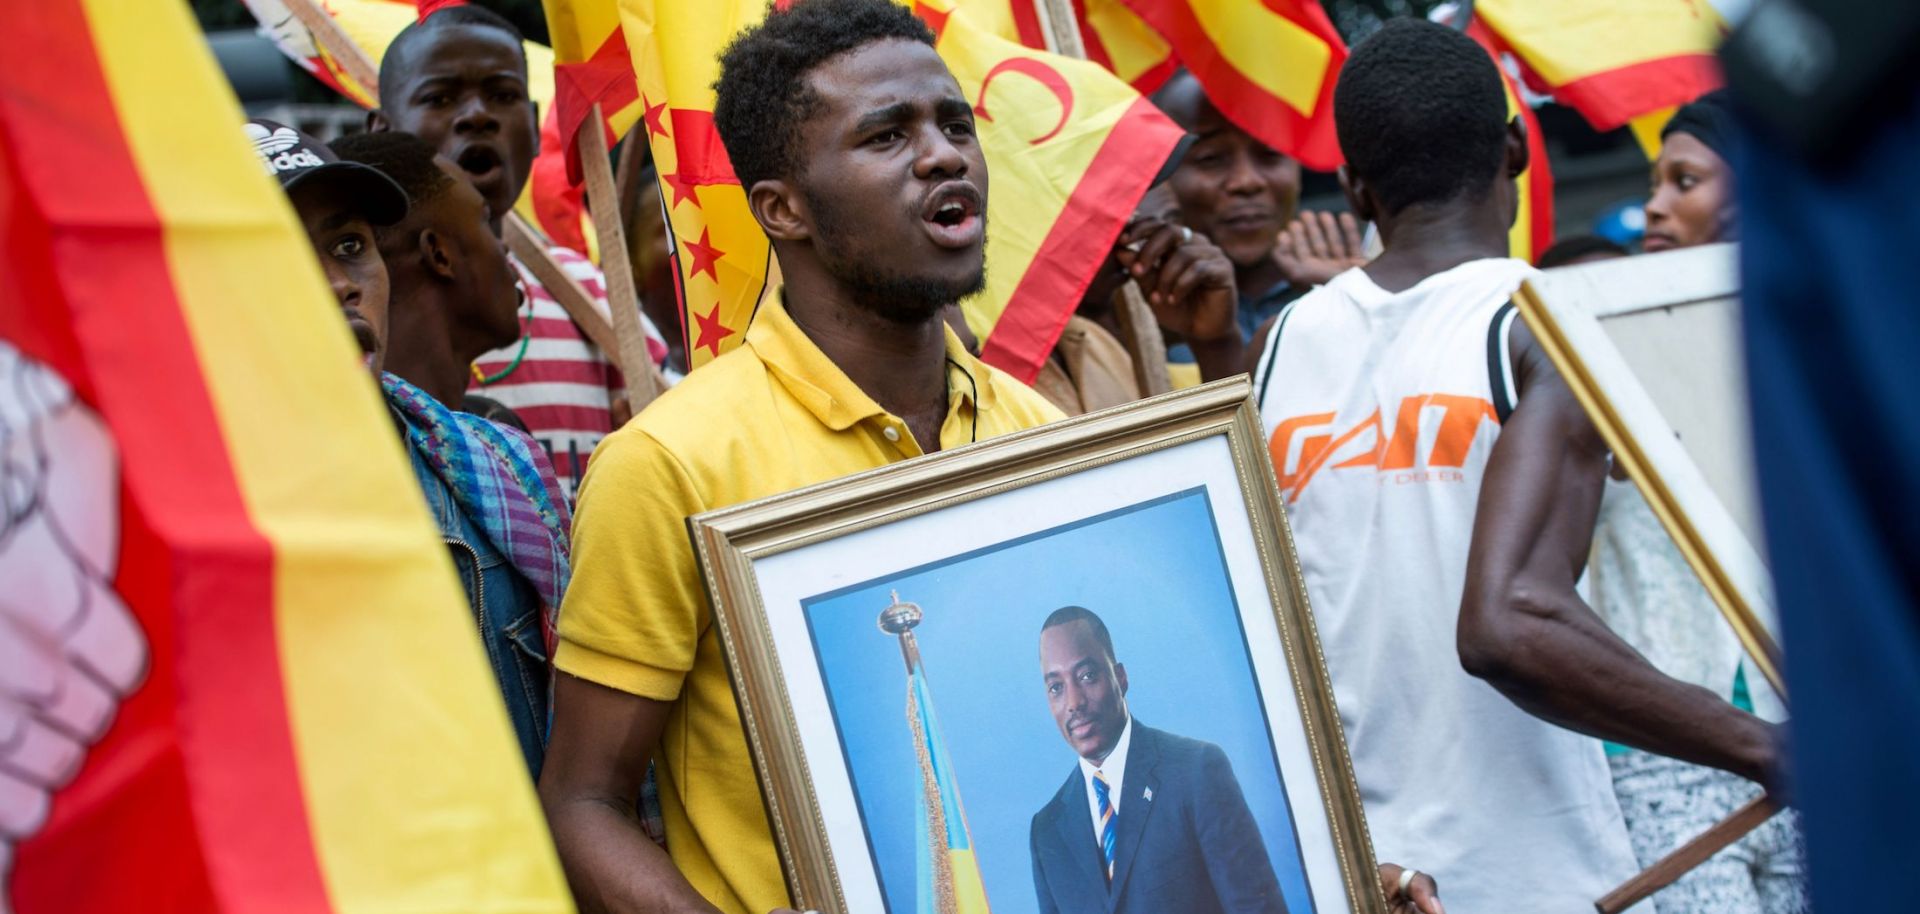 In this photo, a supporter of Congolese President Joseph Kabila stands with other people gathered outside parliament in the capital of Kinshasa, where Kabila was speaking on July 19, 2018.